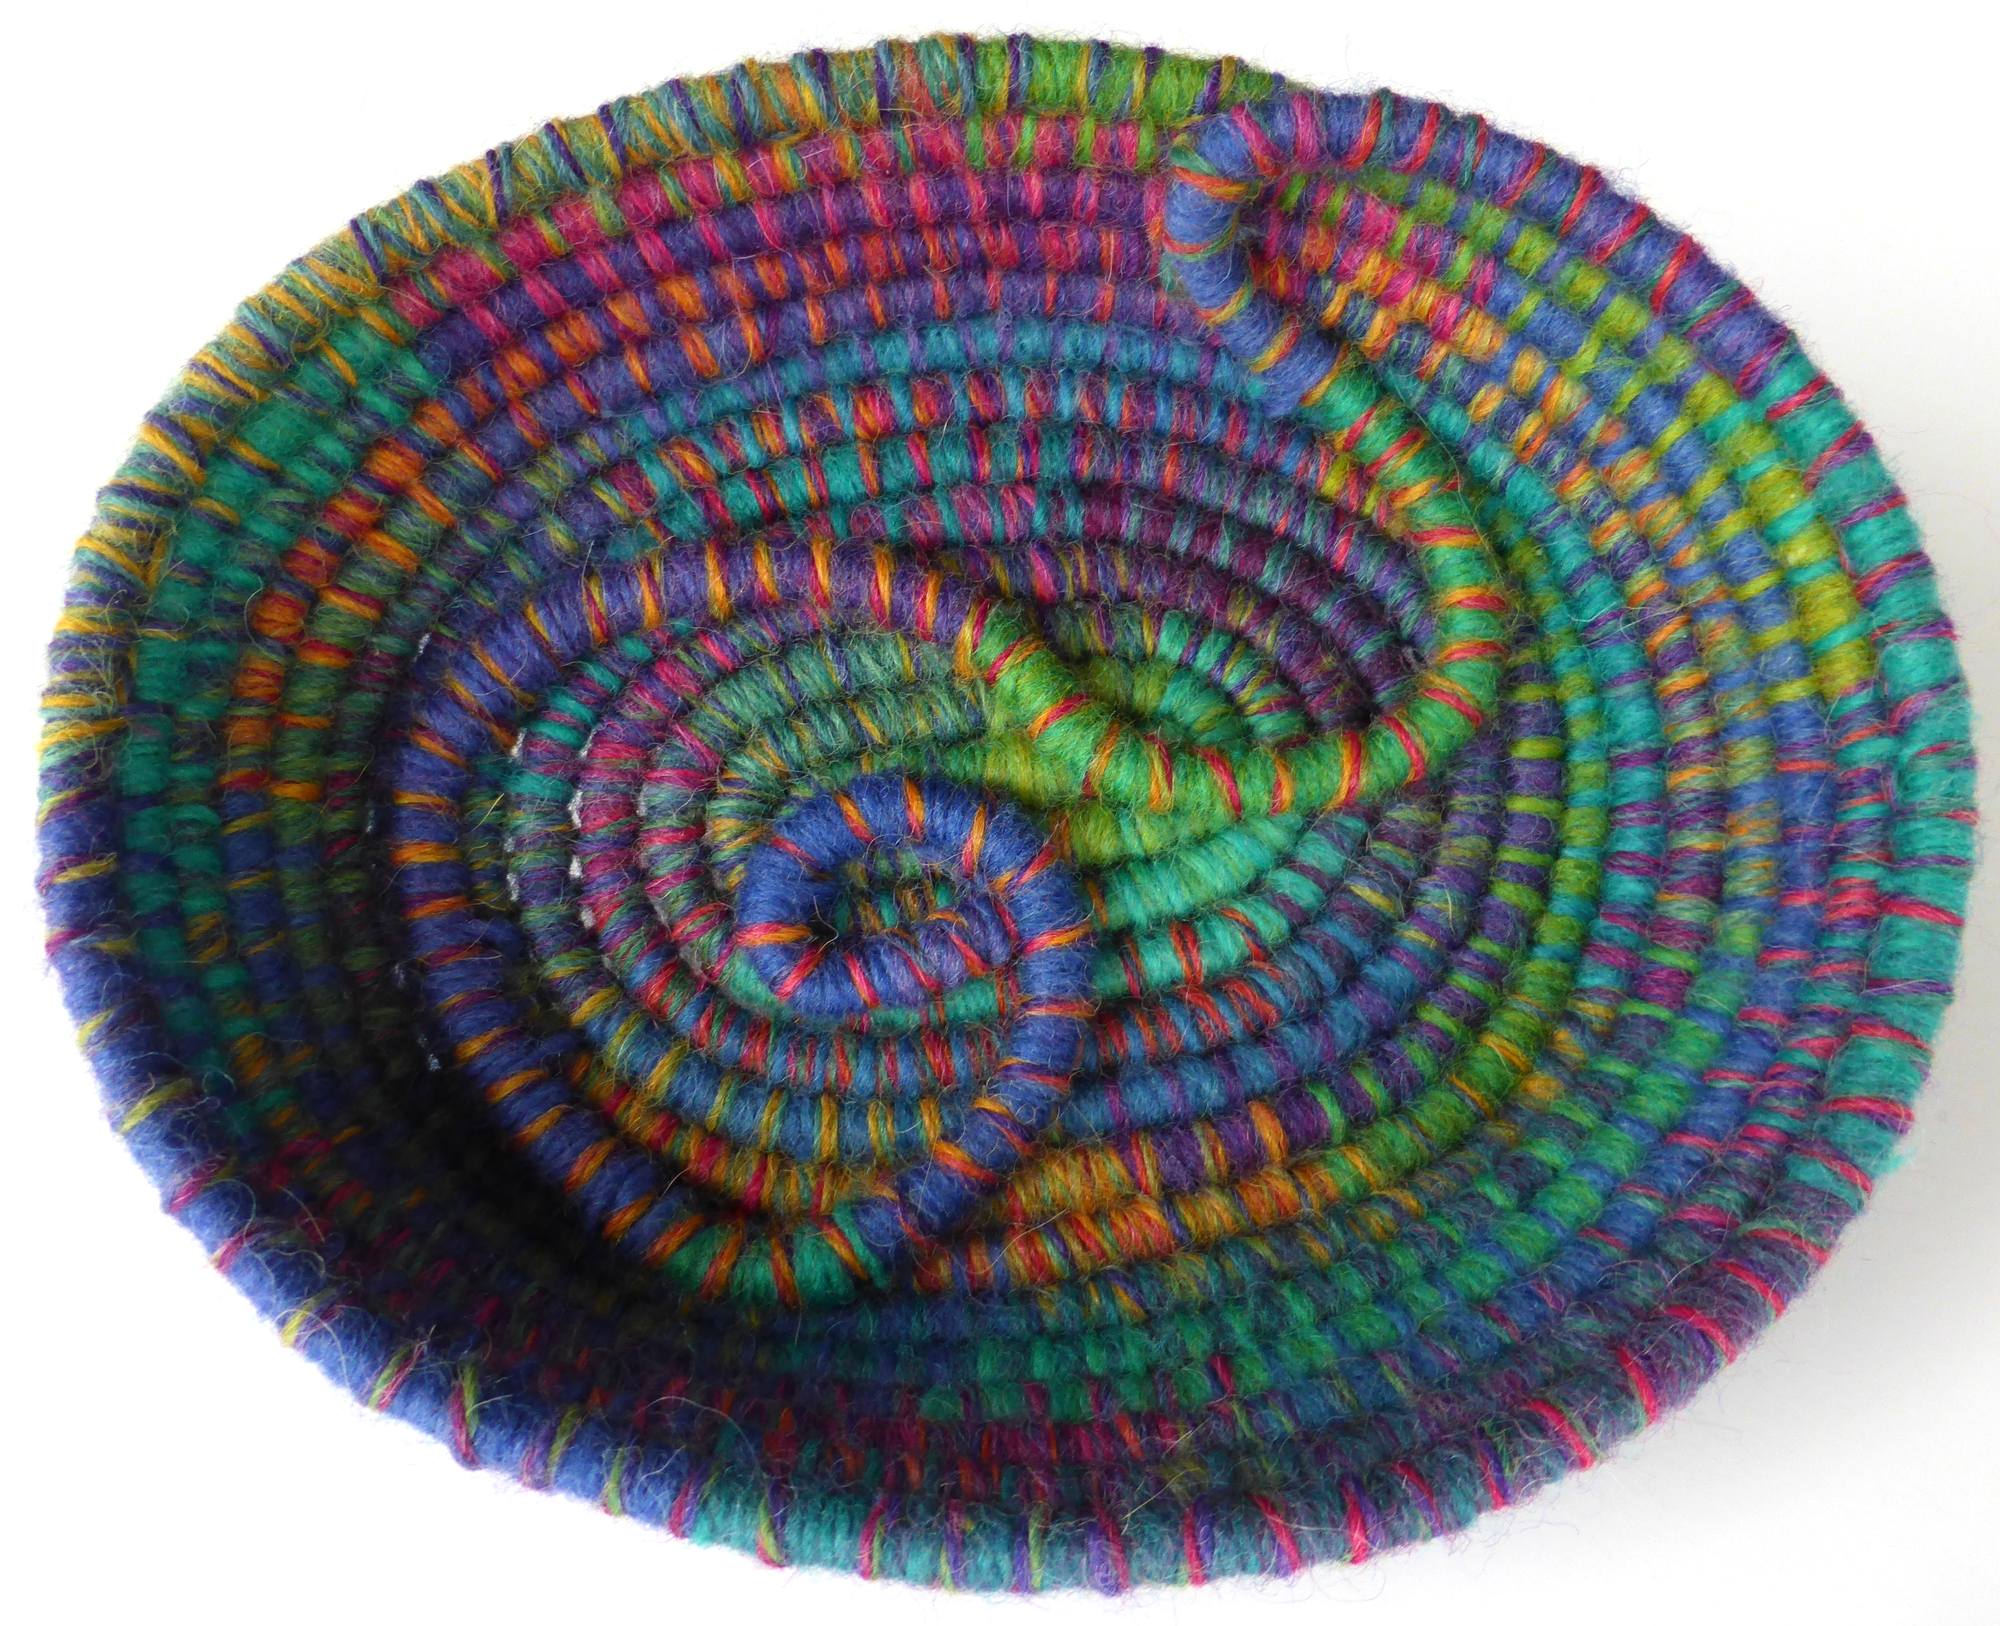 Opal Coil Basket (2014) by Andrea McCallum